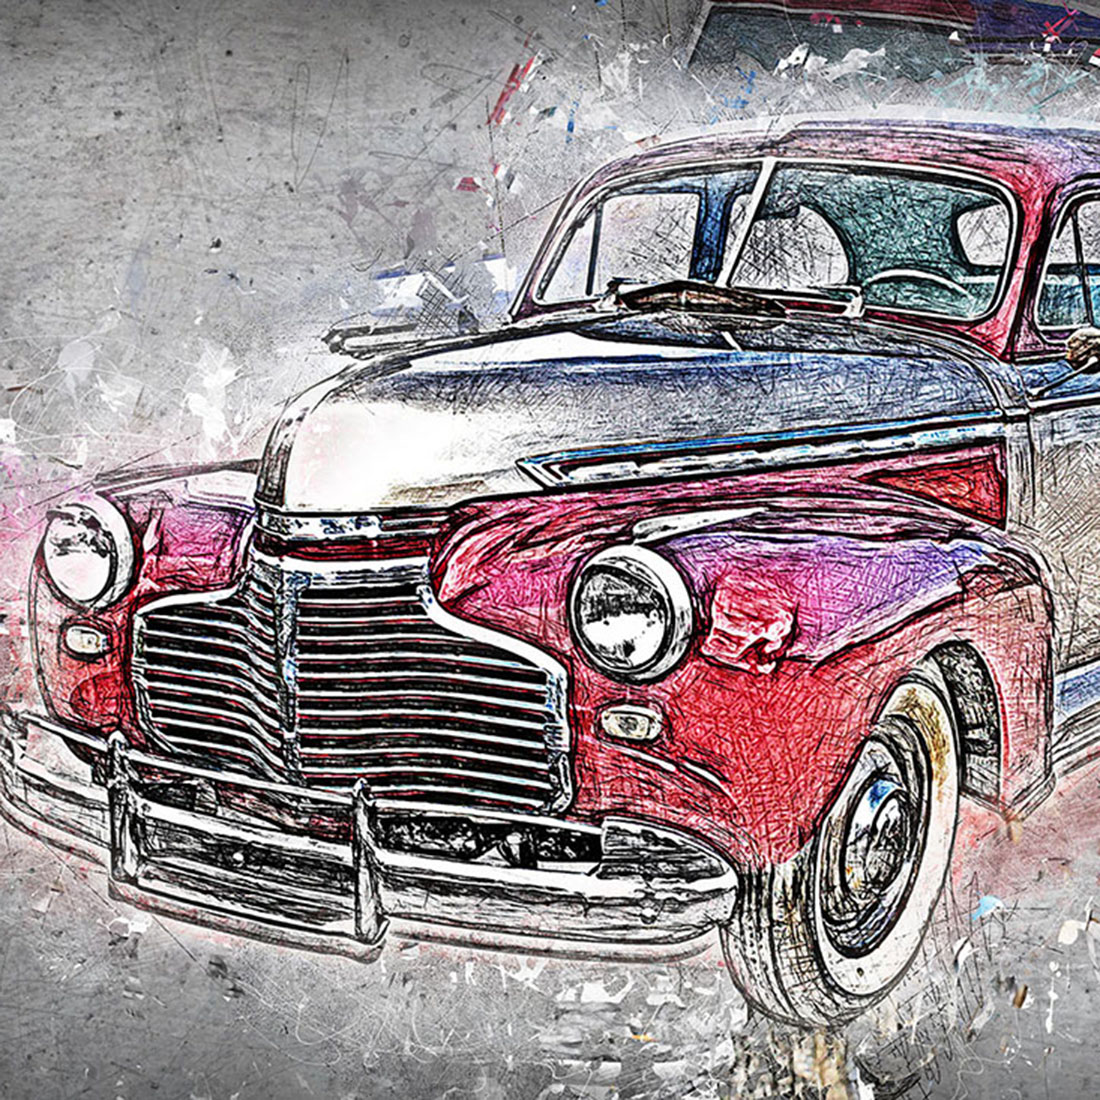 12 Vintage Classic Cars HQ Graphics with Grunge Style main cover.